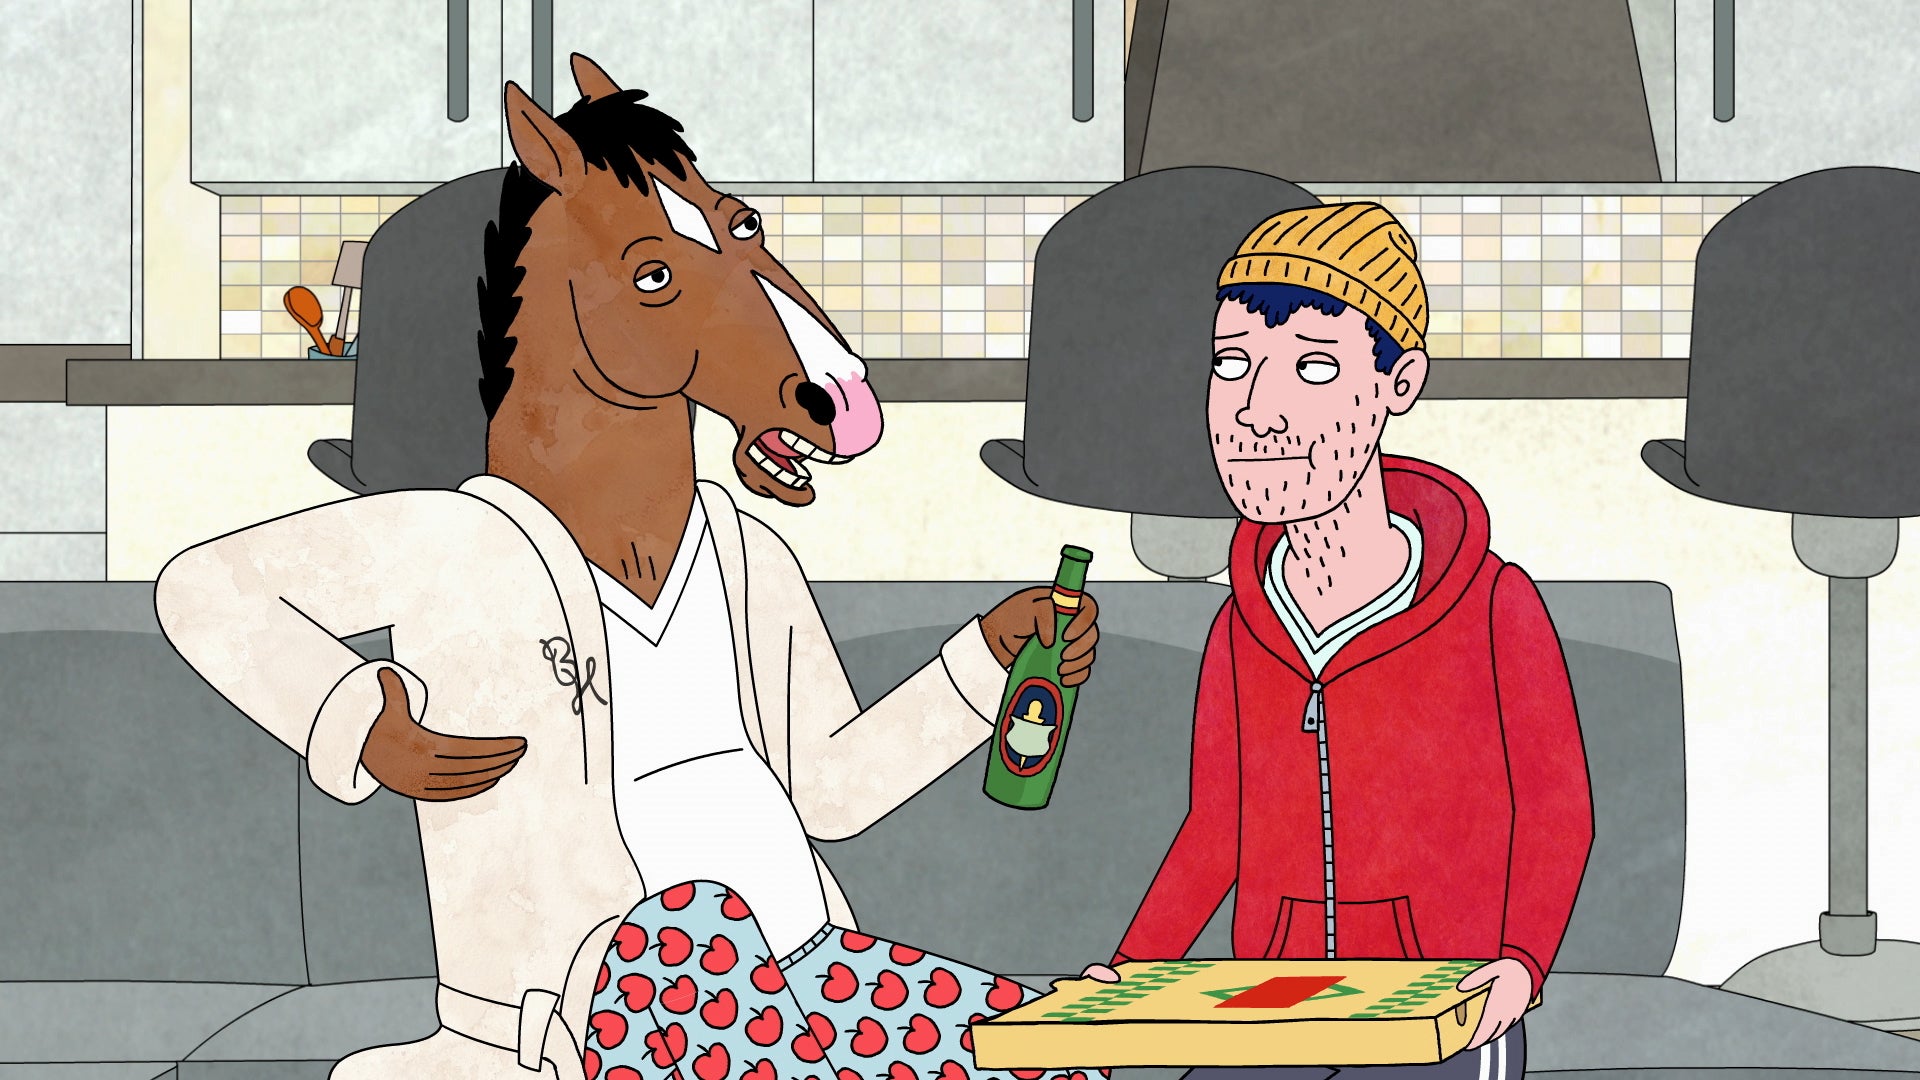 Will Arnett and Aaron Paul lend their voices to BoJack Horseman (Picture: Netflix)